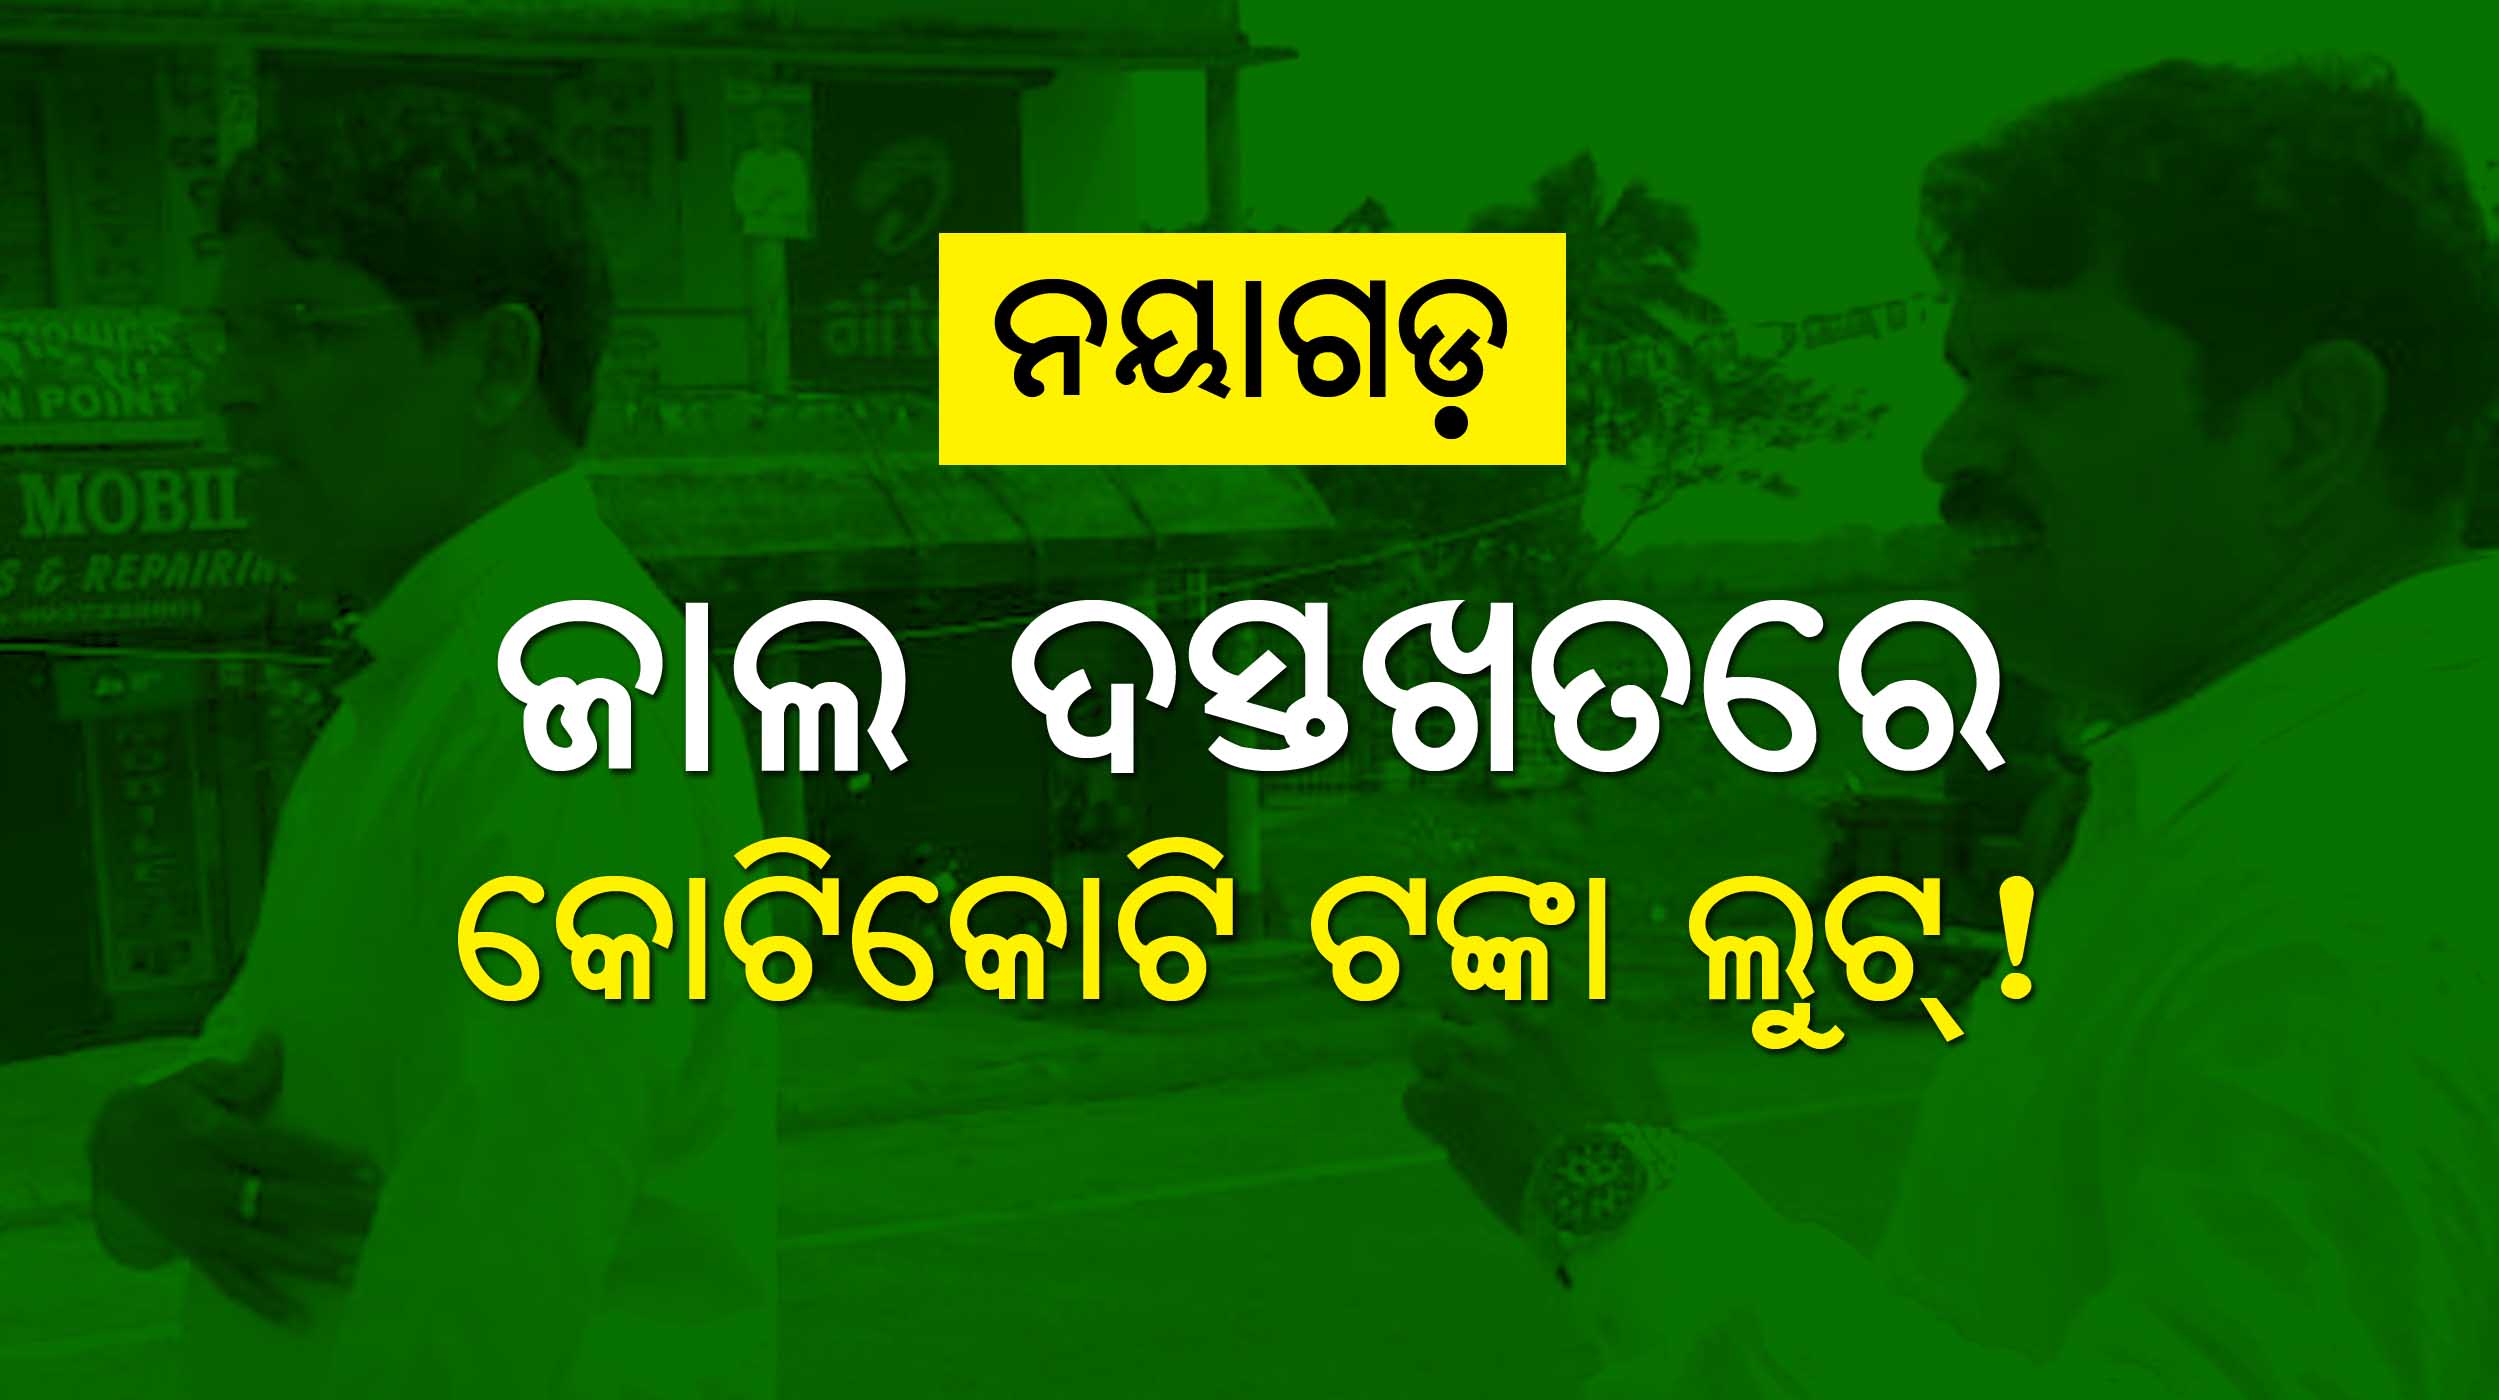 Nayagarh BJD leader alegedly takes crores of govt fund forging the signature of block chairman